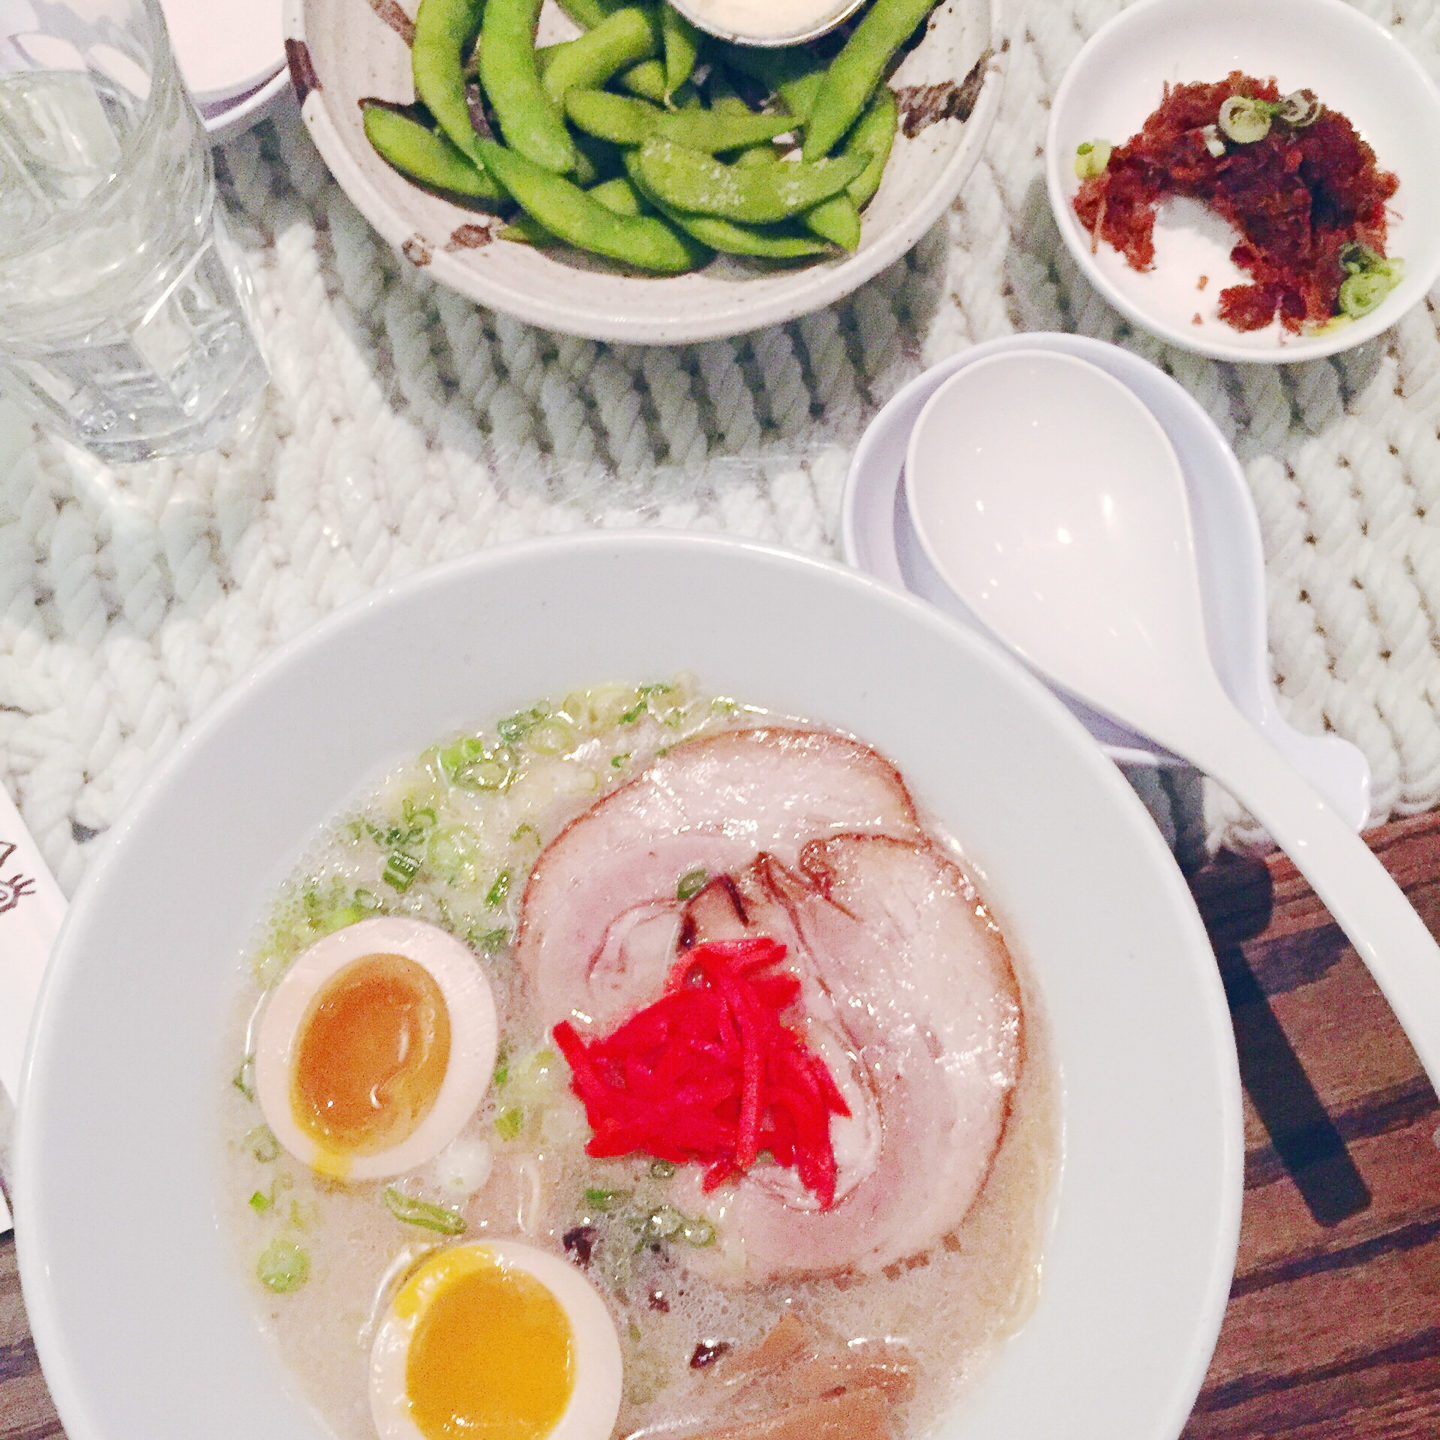 A must read! An NYC restaurant guide featuring all of New York City's best restaurants, from brunch to late night dinners. It even details key dishes to try at each restaurant! Ippudo is one of them!